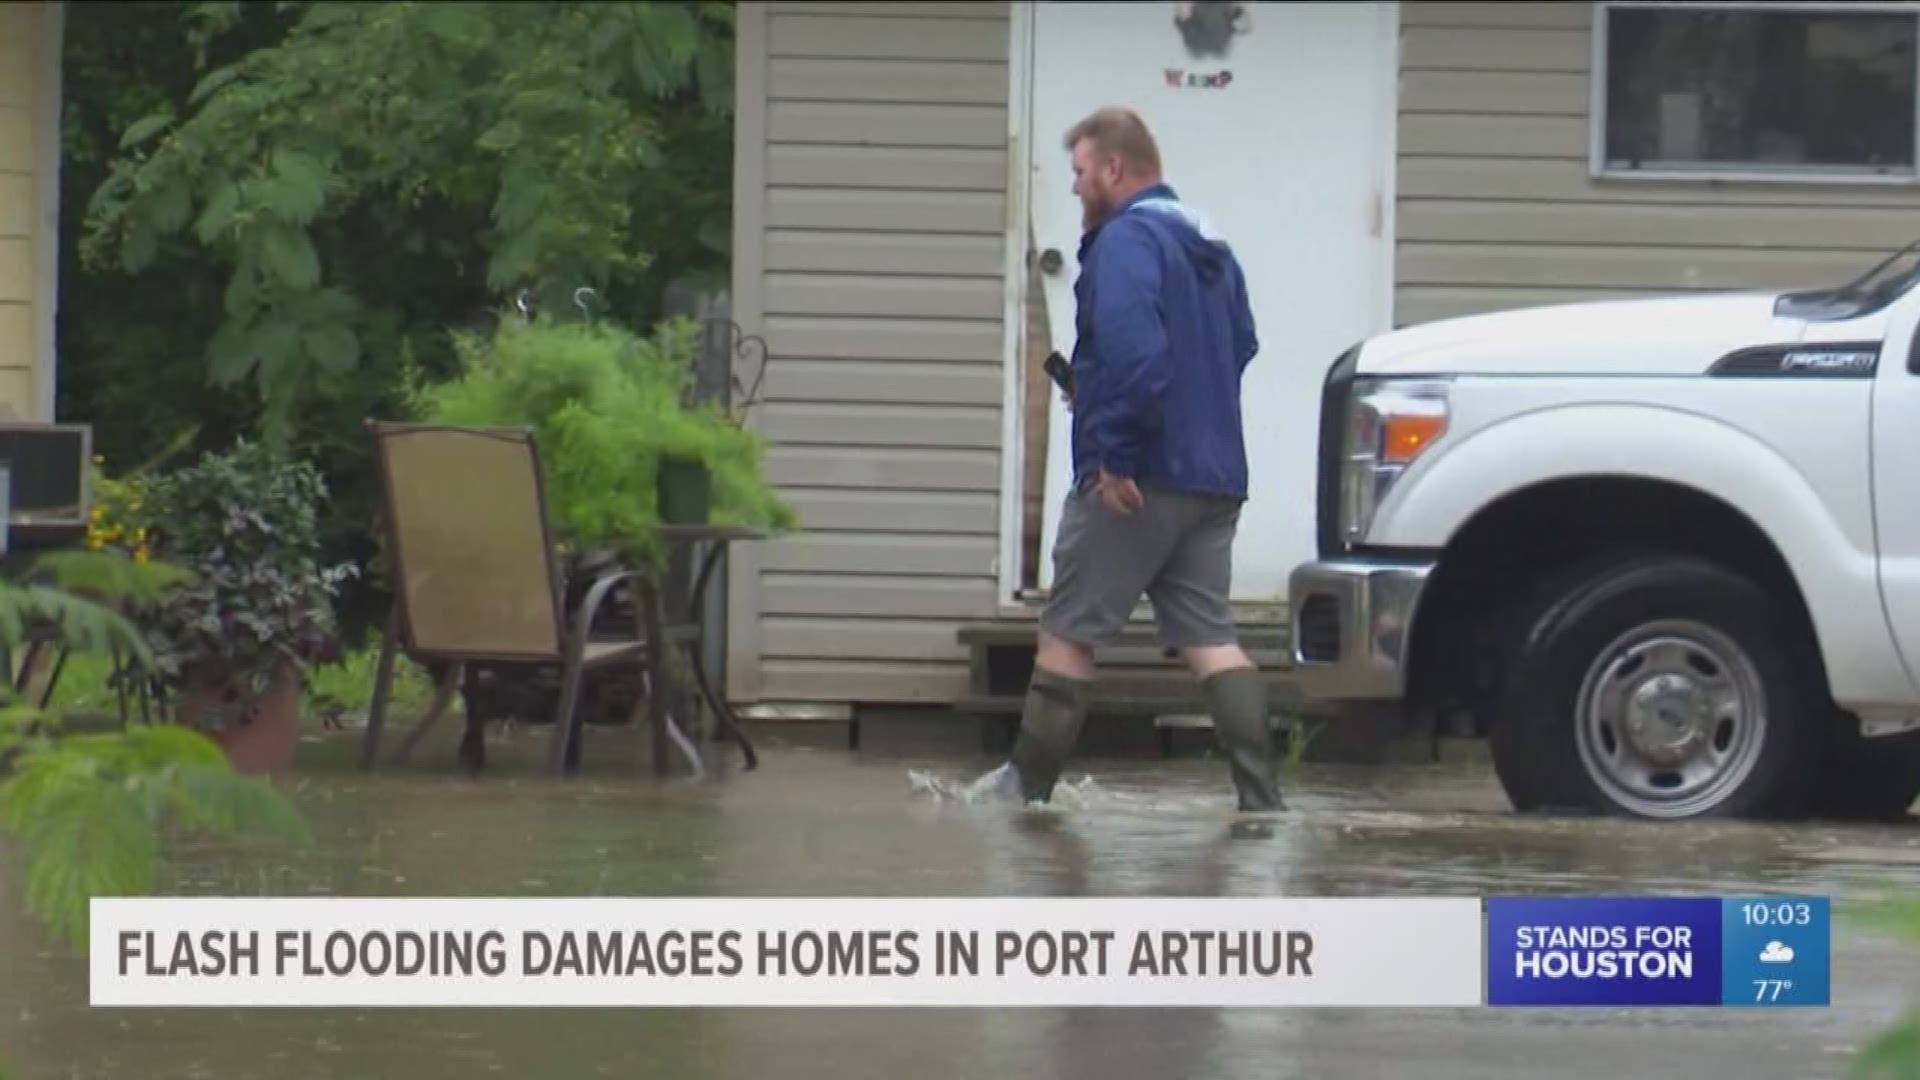 Houston-area residents saw some showers Tuesday, but the heaviest rain hit farther east Tuesday near Beaumont, resulting in flooding for some residents.